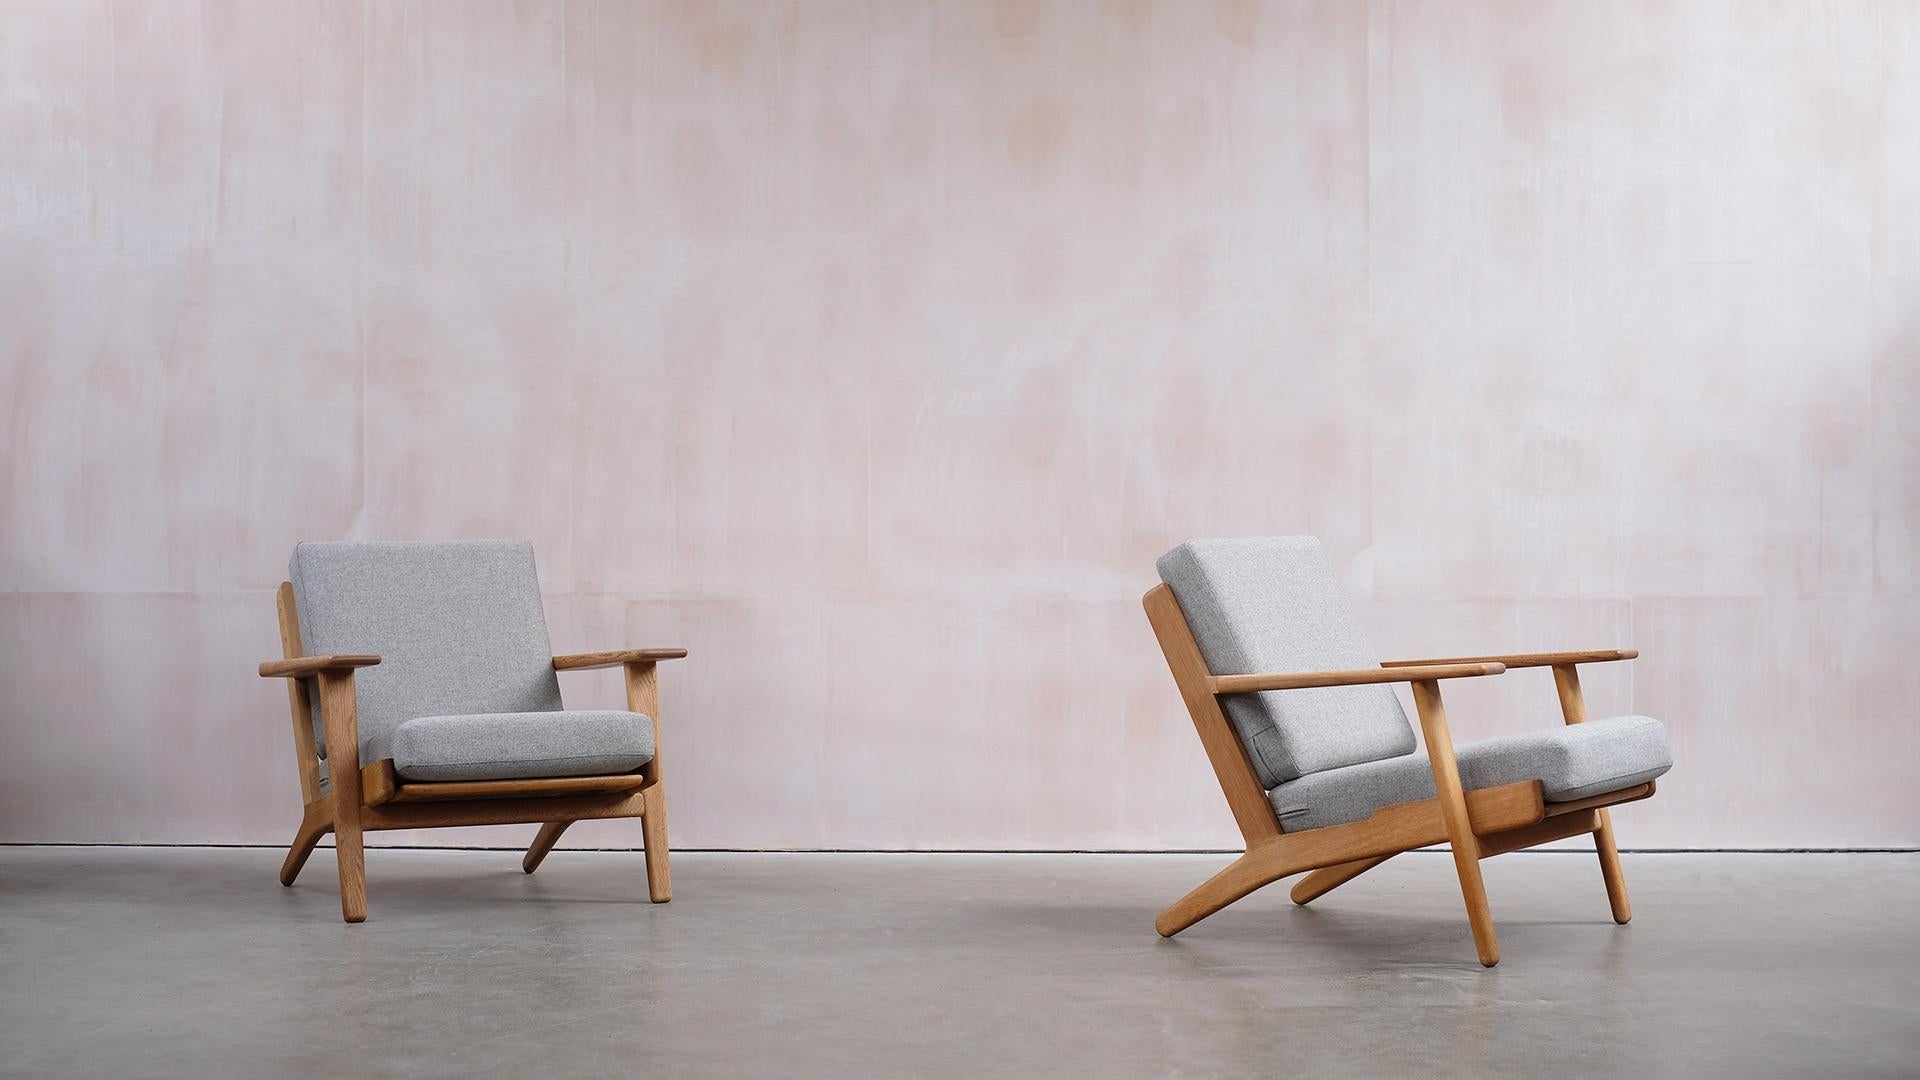 Fantastic pair of GE290 lounge chairs designed by Hans Wegner for Getama, Denmark. Solid oak frames with wonderful grain pattern and original patina. Original sprung cushions, fully reconditioned and recovered with a neutral grey fabric by Camira.